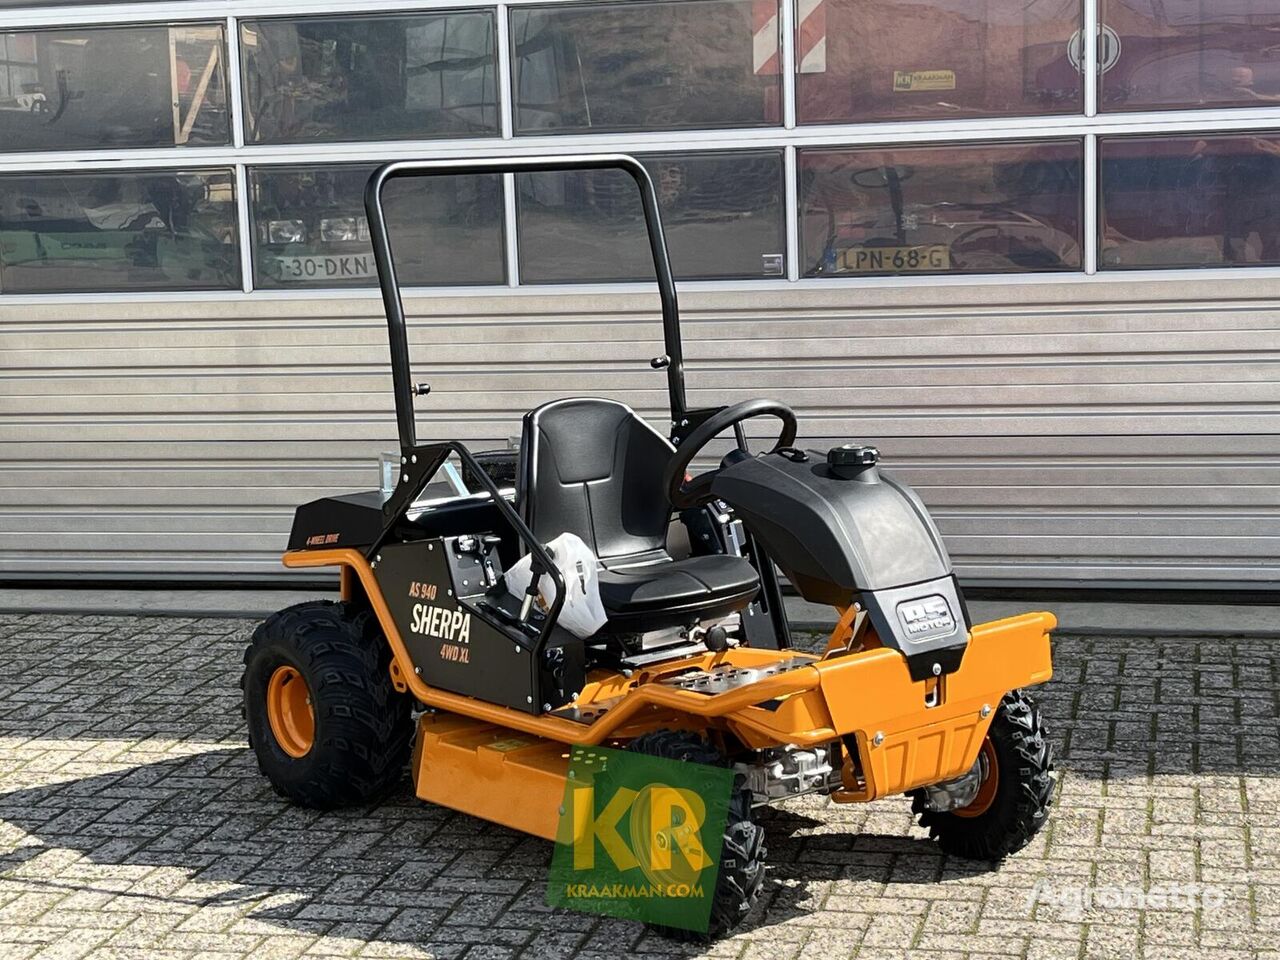 AS 940 sherpa 4 WD XL B&S tractor cortacésped nuevo